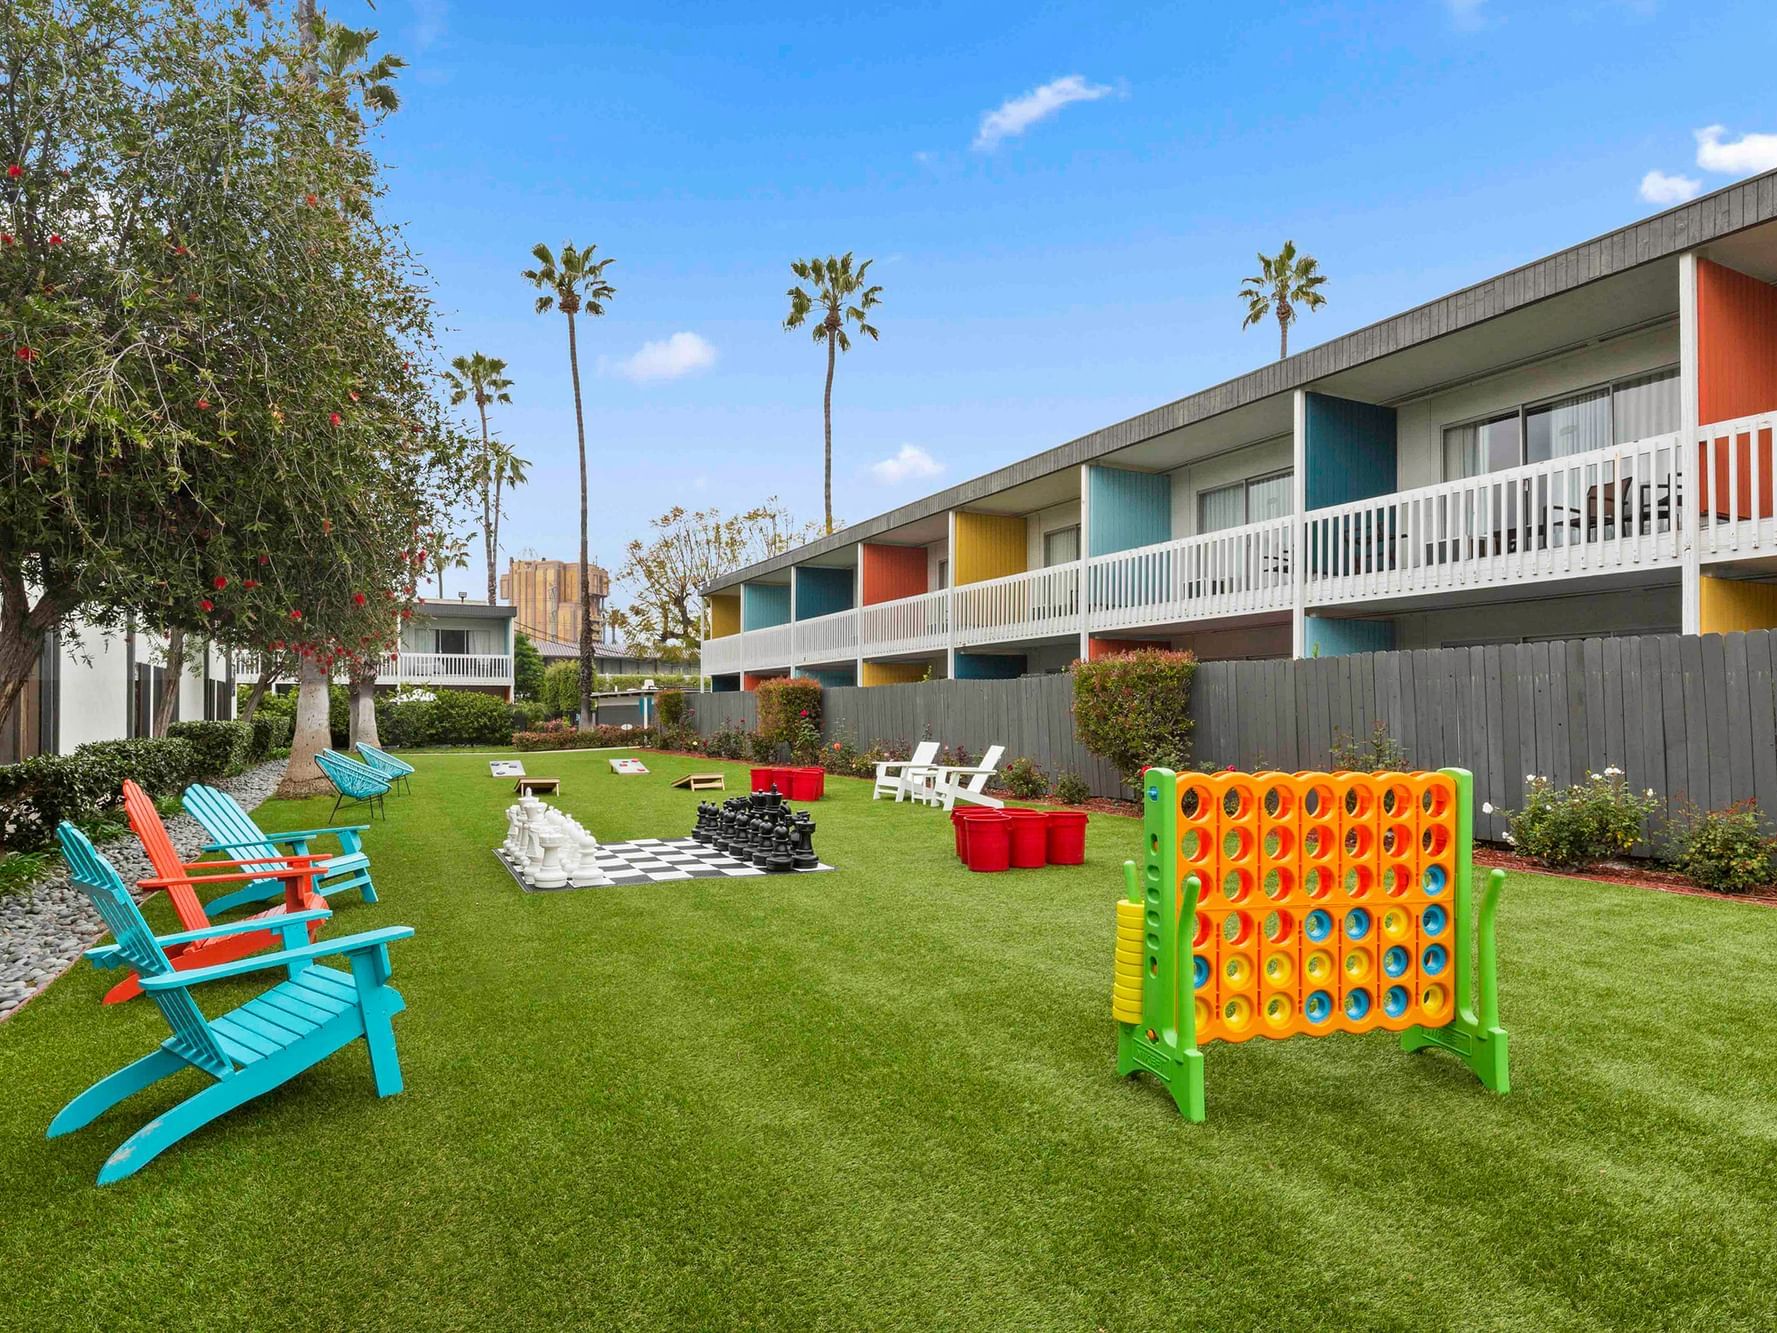 outdoor grassy play area with oversized games and chairs